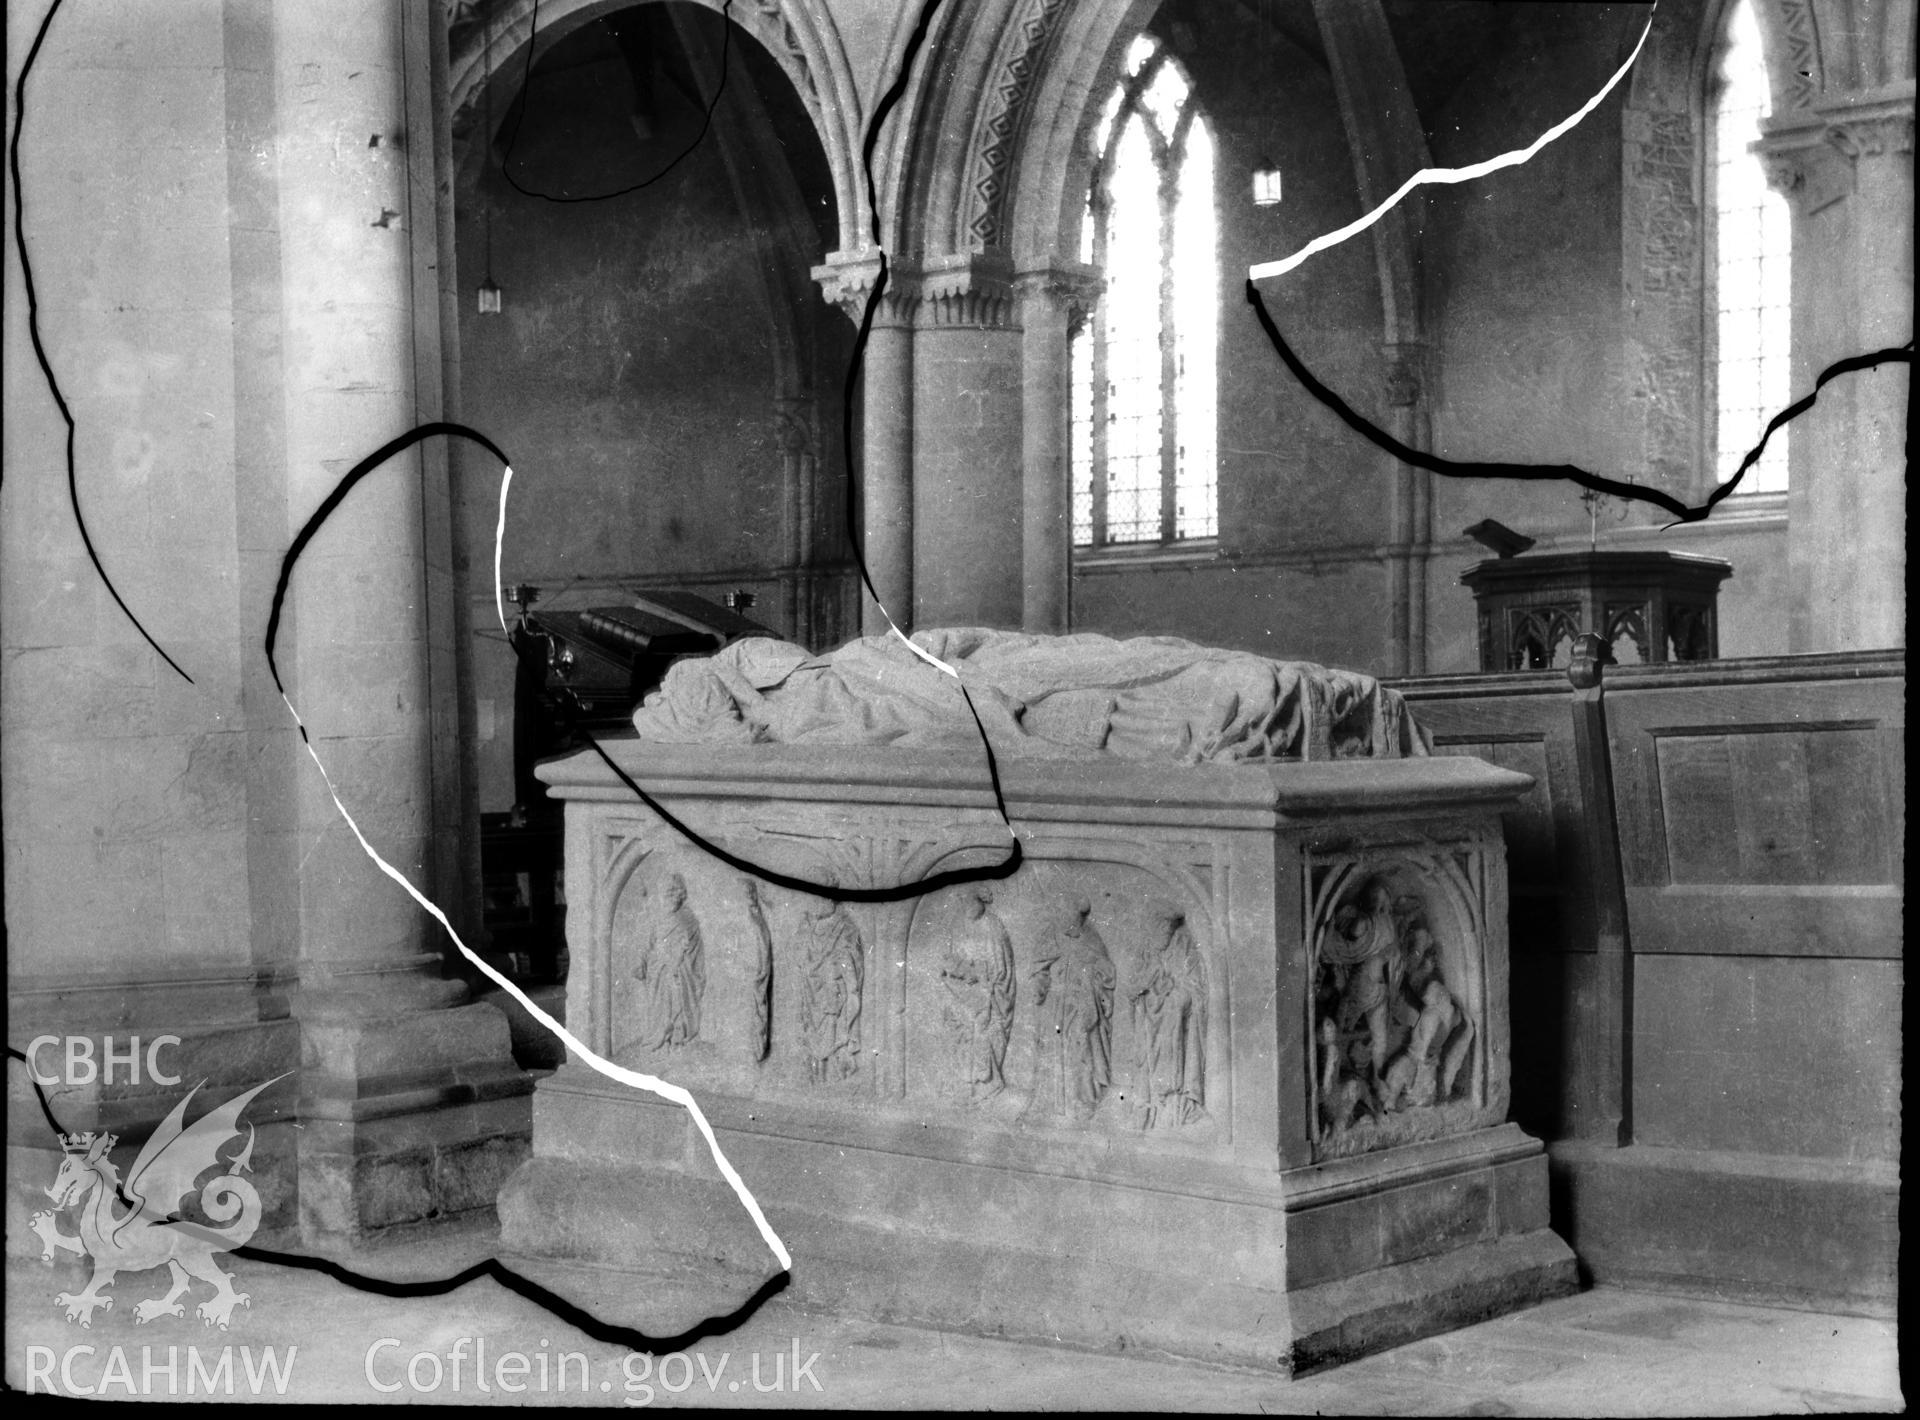 Black and white photo showing memorial tomb in St Davids Cathedral.